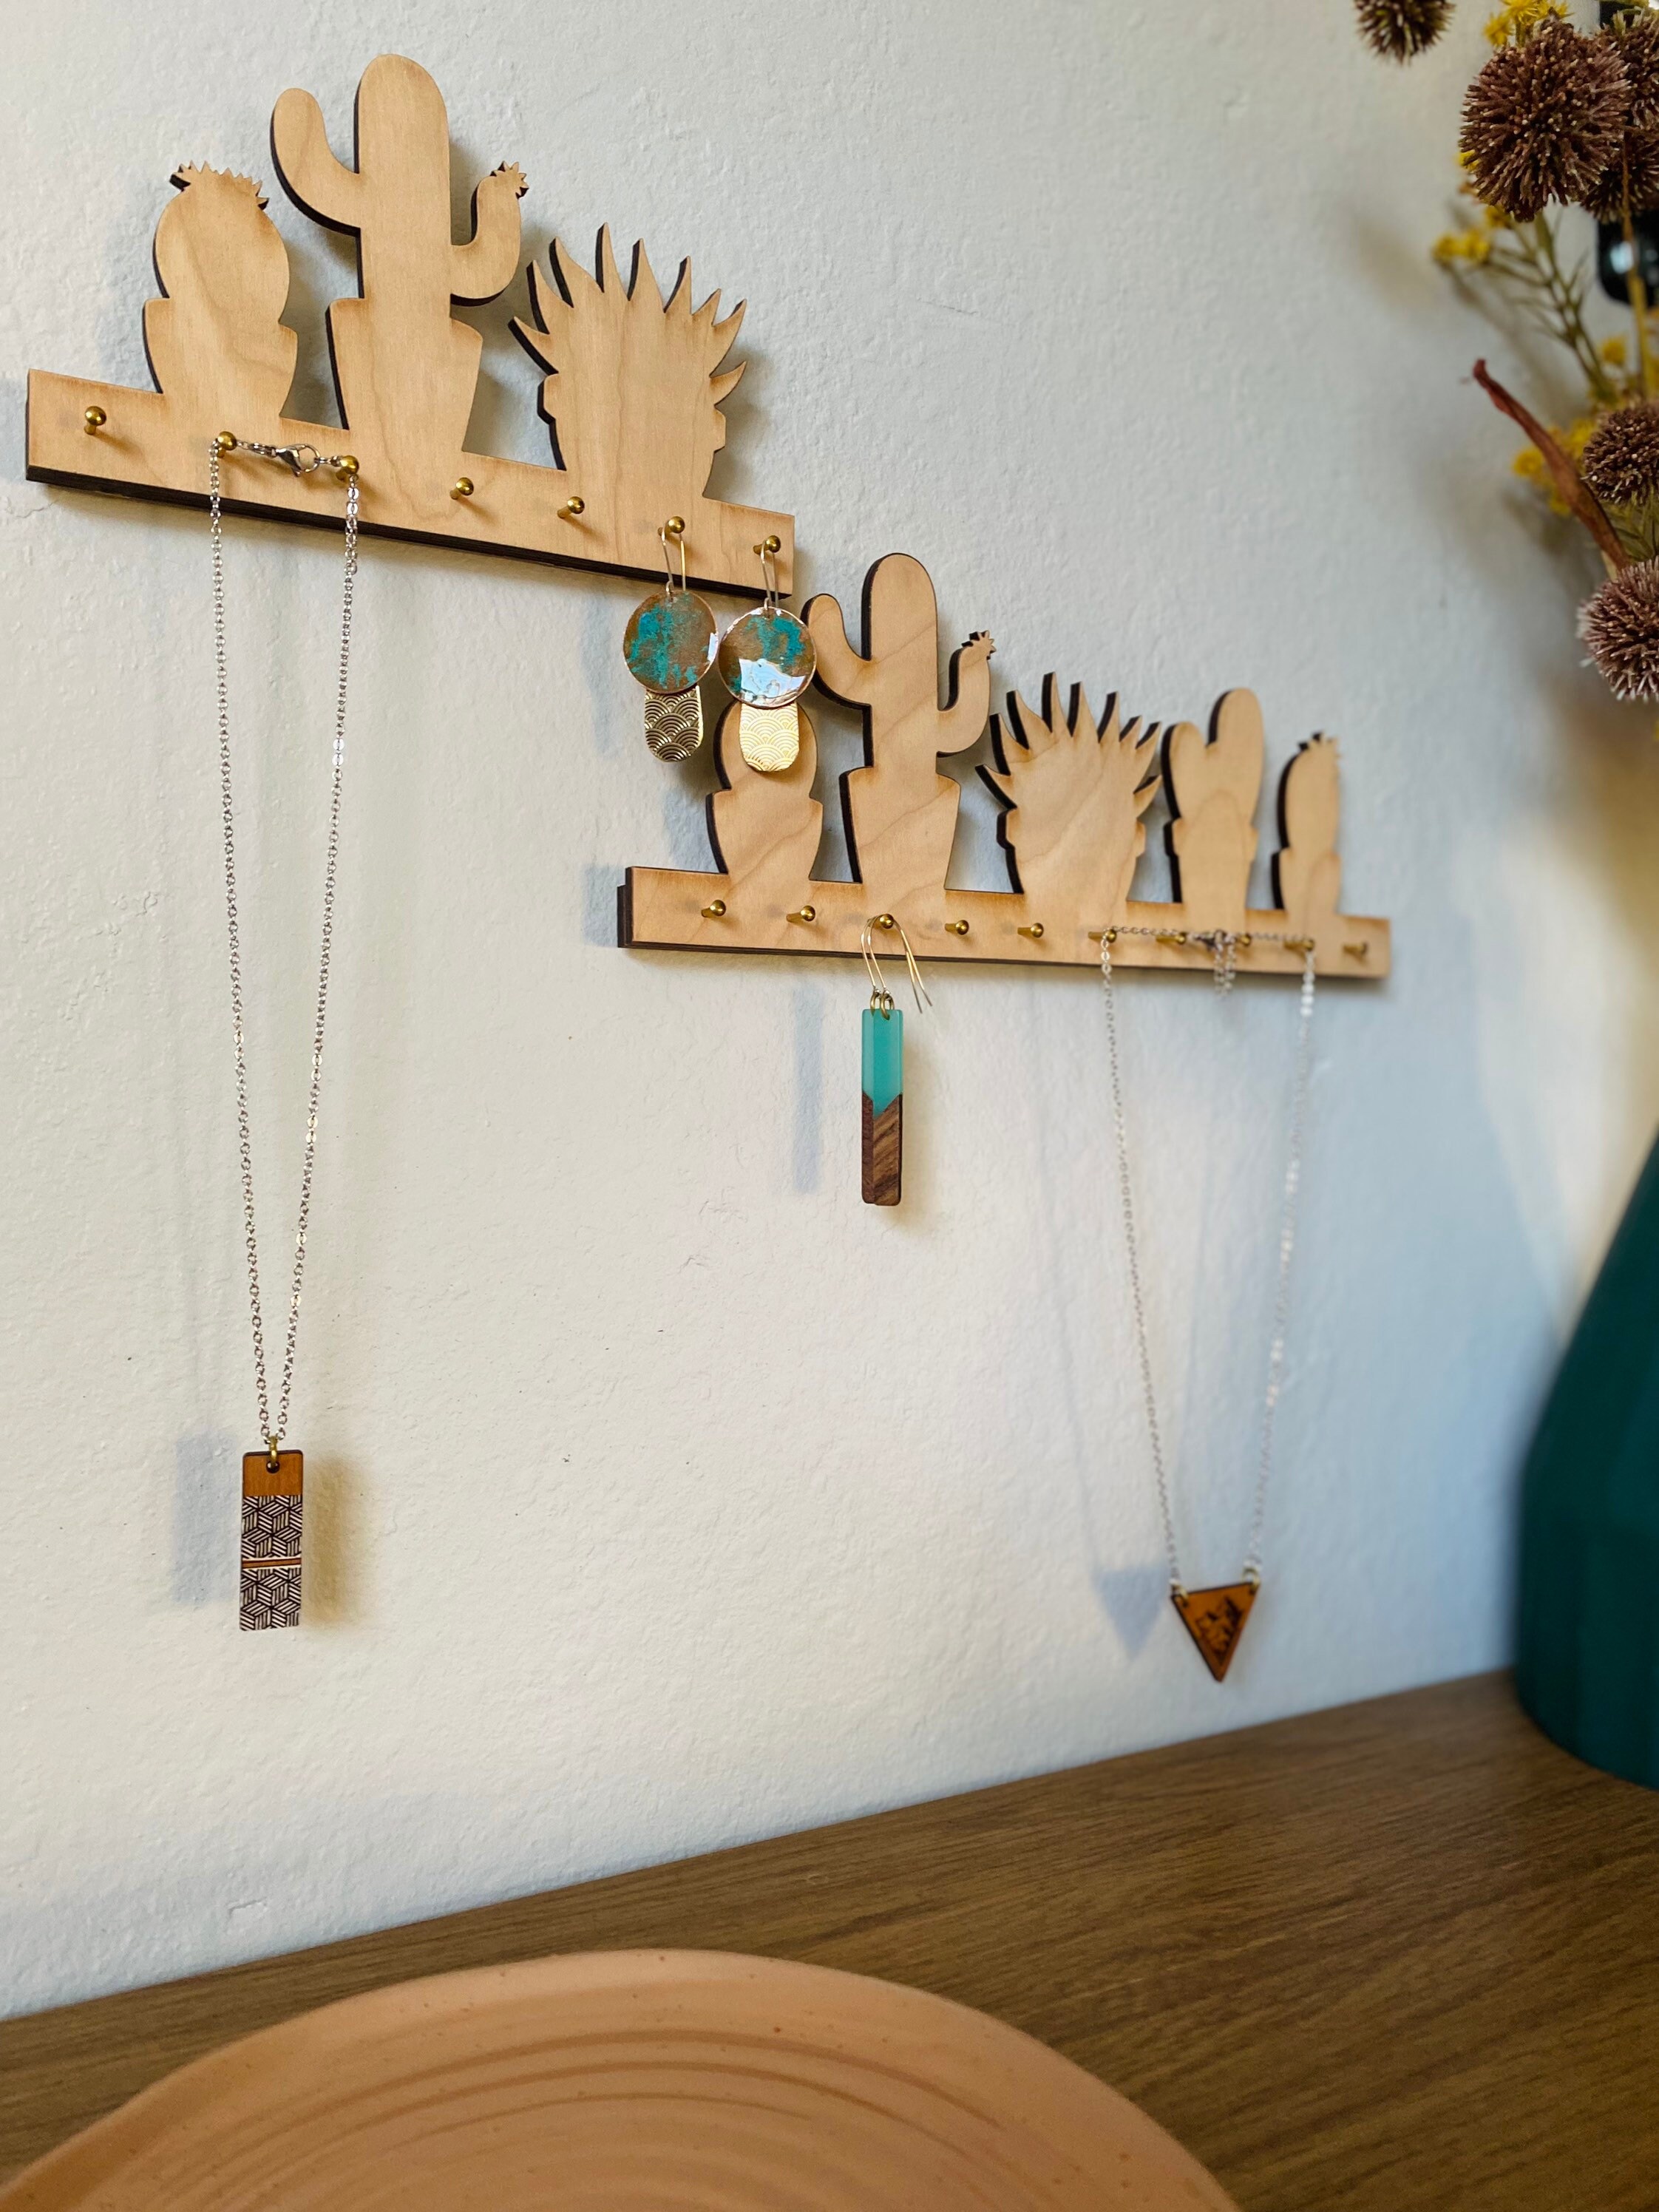 Wood Mountain Necklace Holder, Wood Necklace Hanger, Jewelry Display Set,  Necklace Organizer, Jewelry Organizer, Jewelry Stand, Gift Ideas 